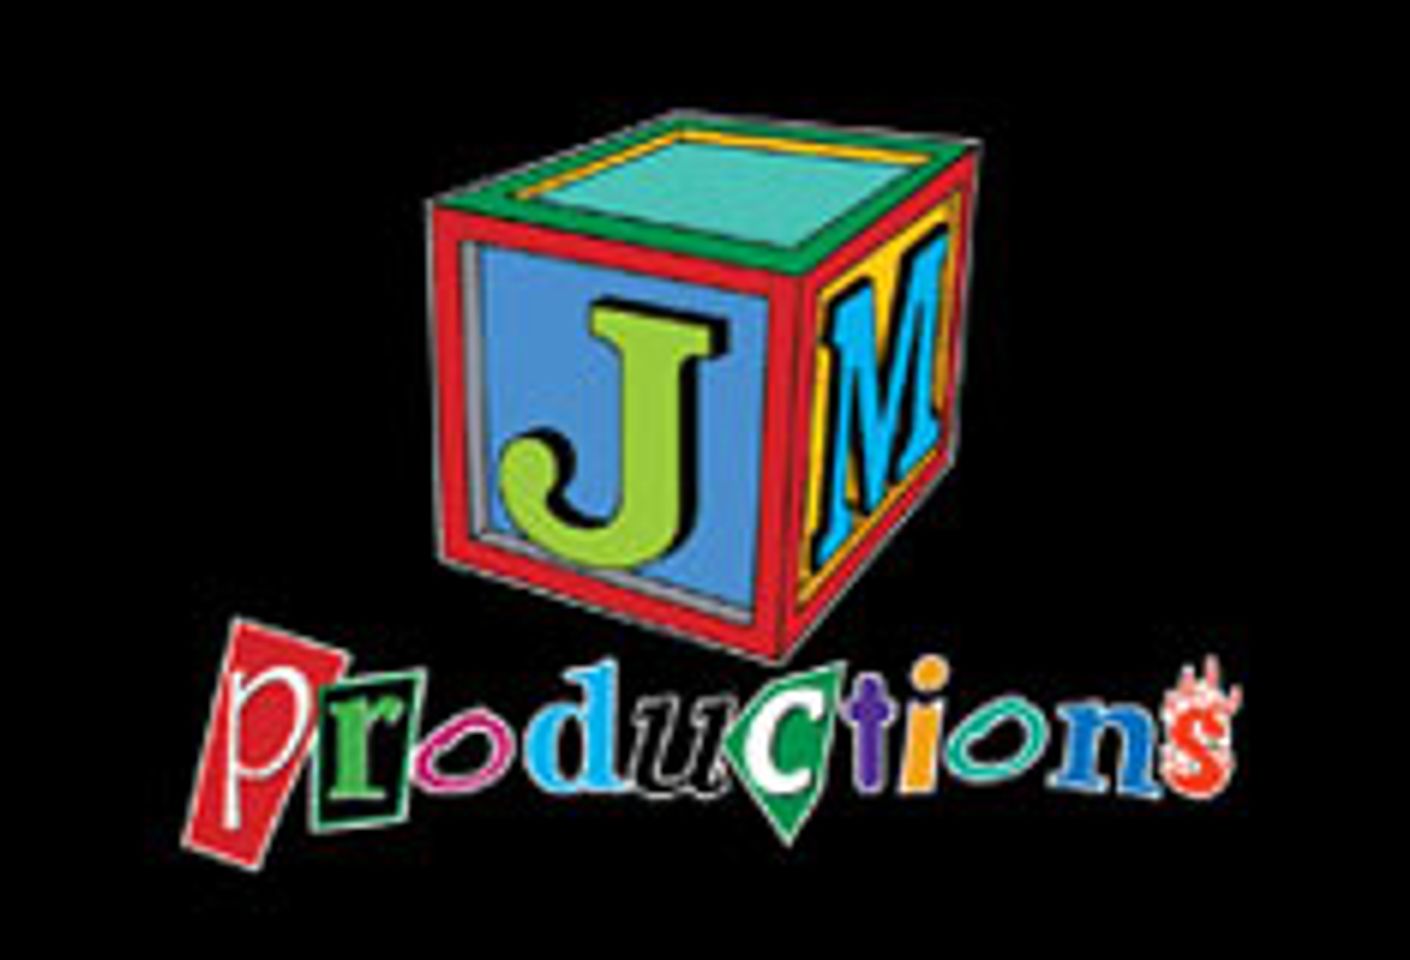 JM Productions Puts DVDs on Catalog for First Time